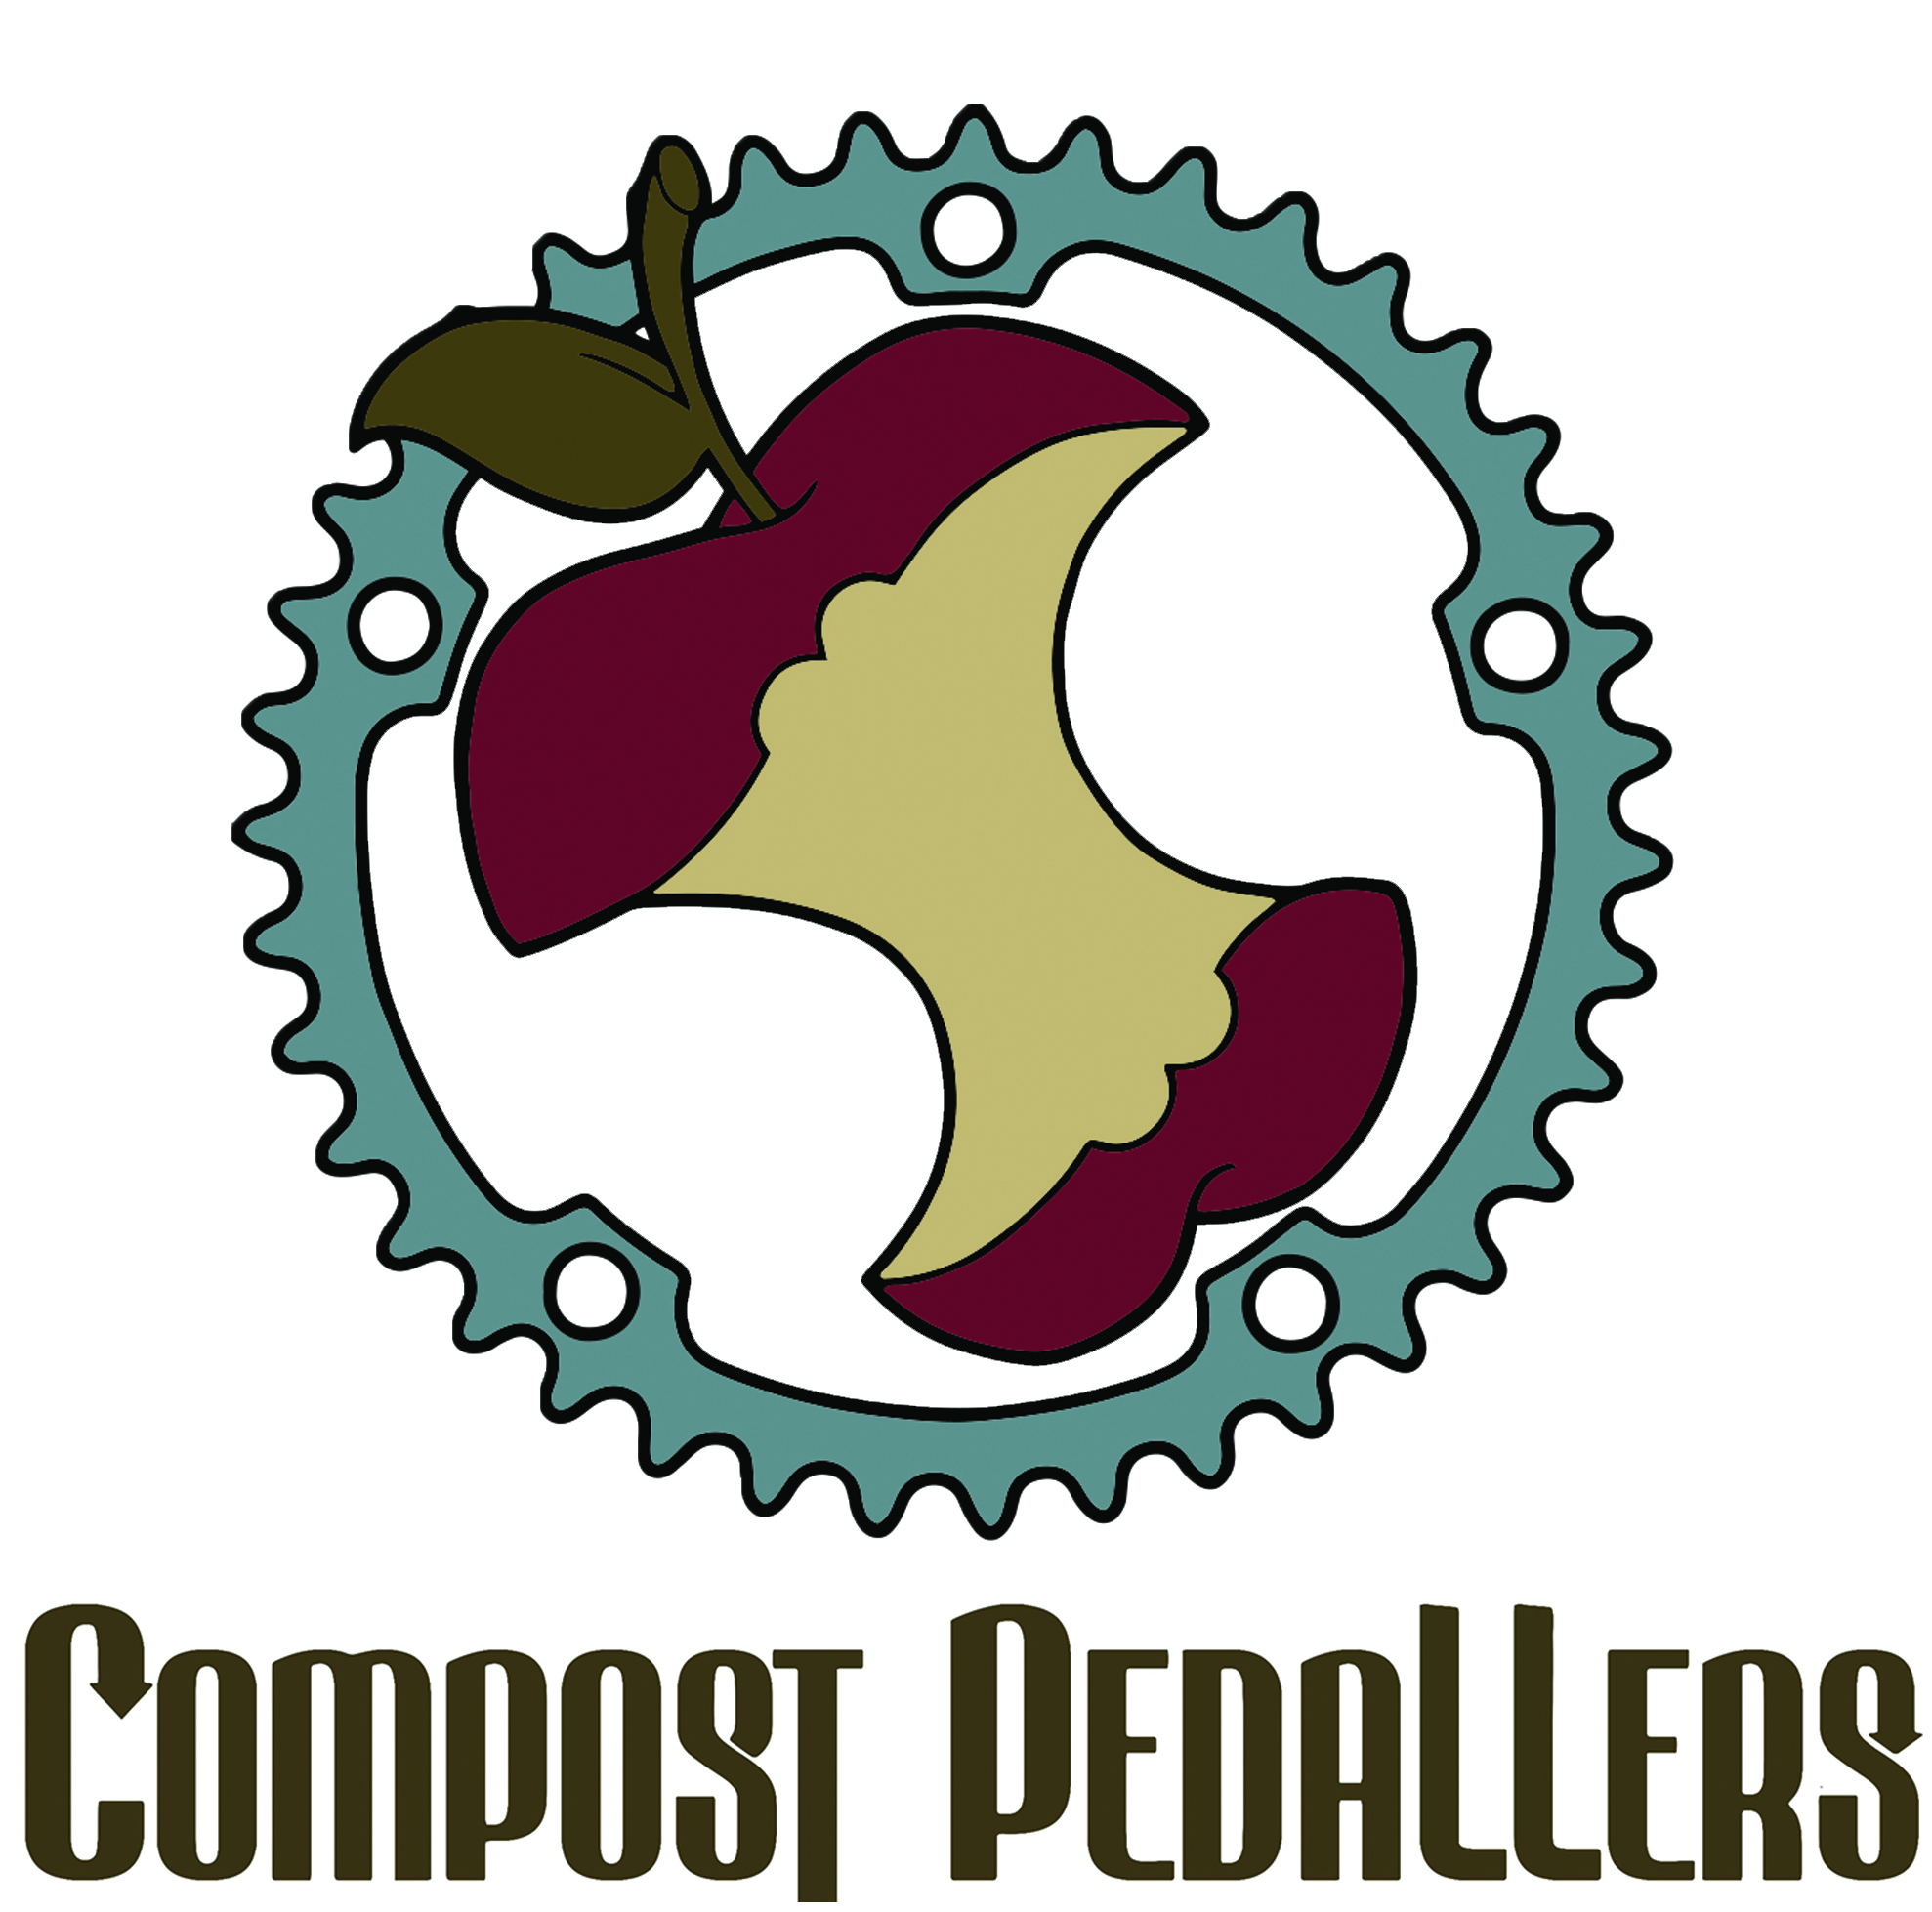 Compost Pedallers